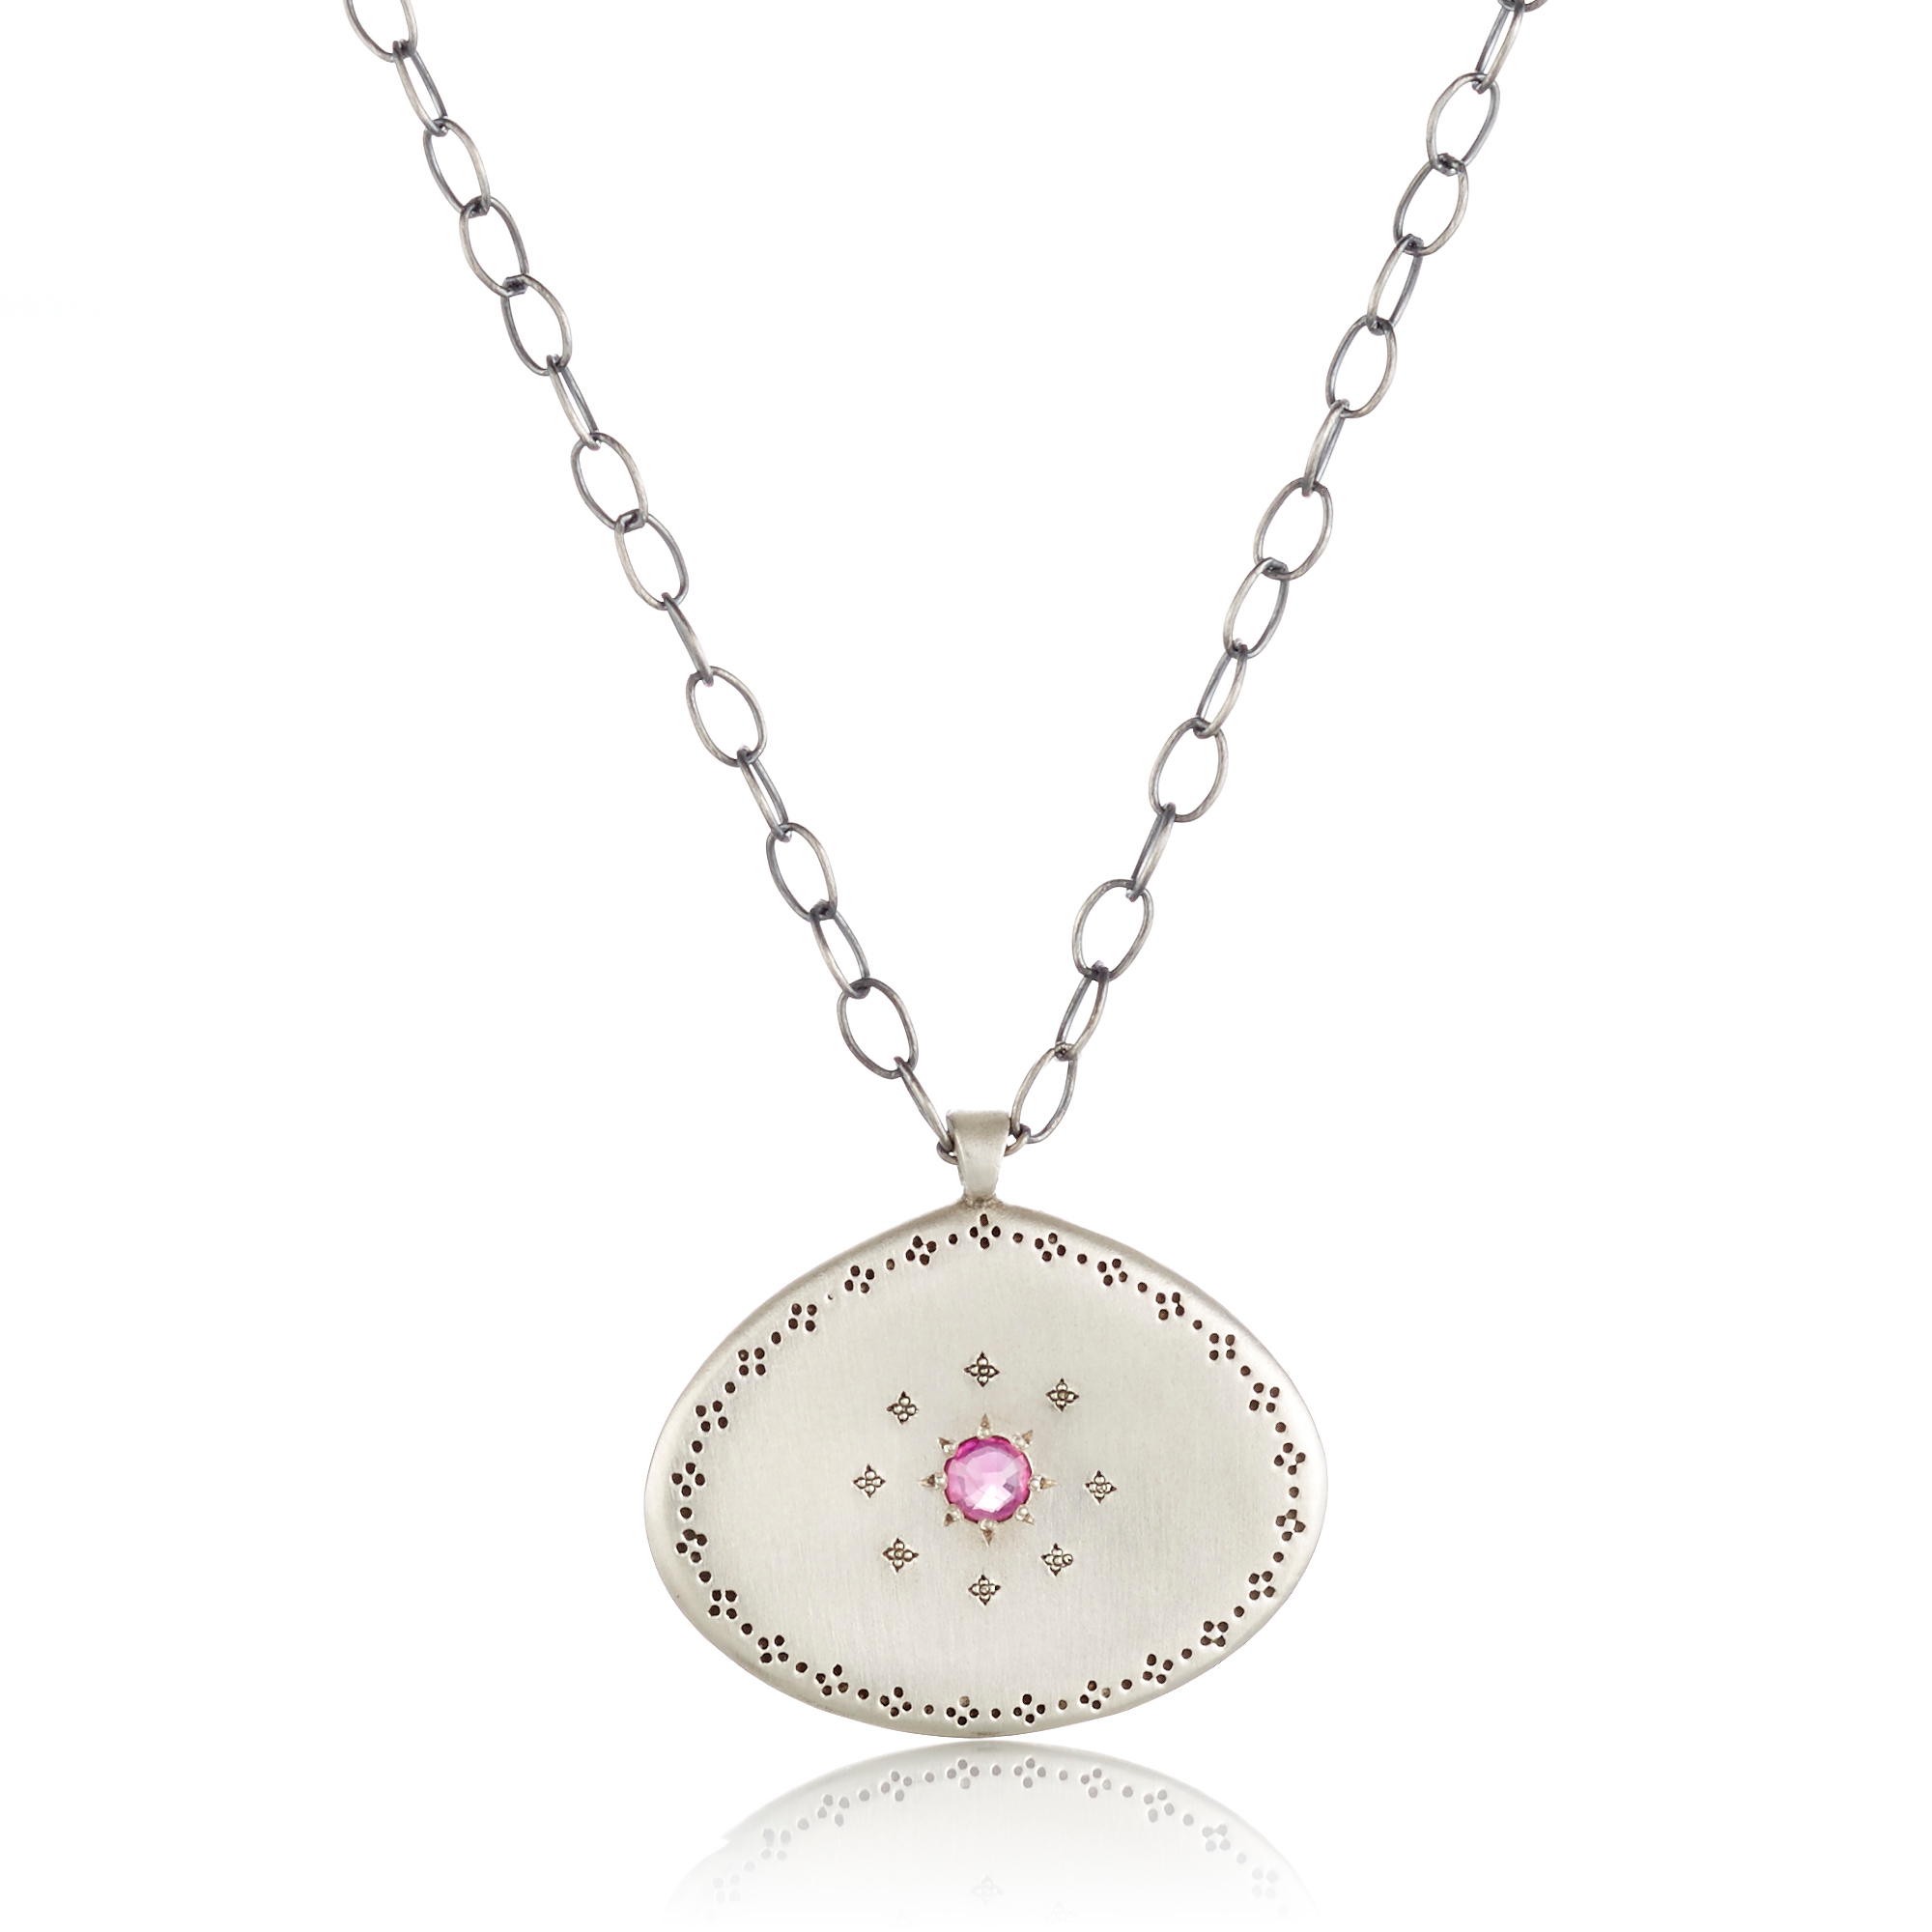 Adel Chefridi Sterling Silver With Ruby Center Necklace | Gump's